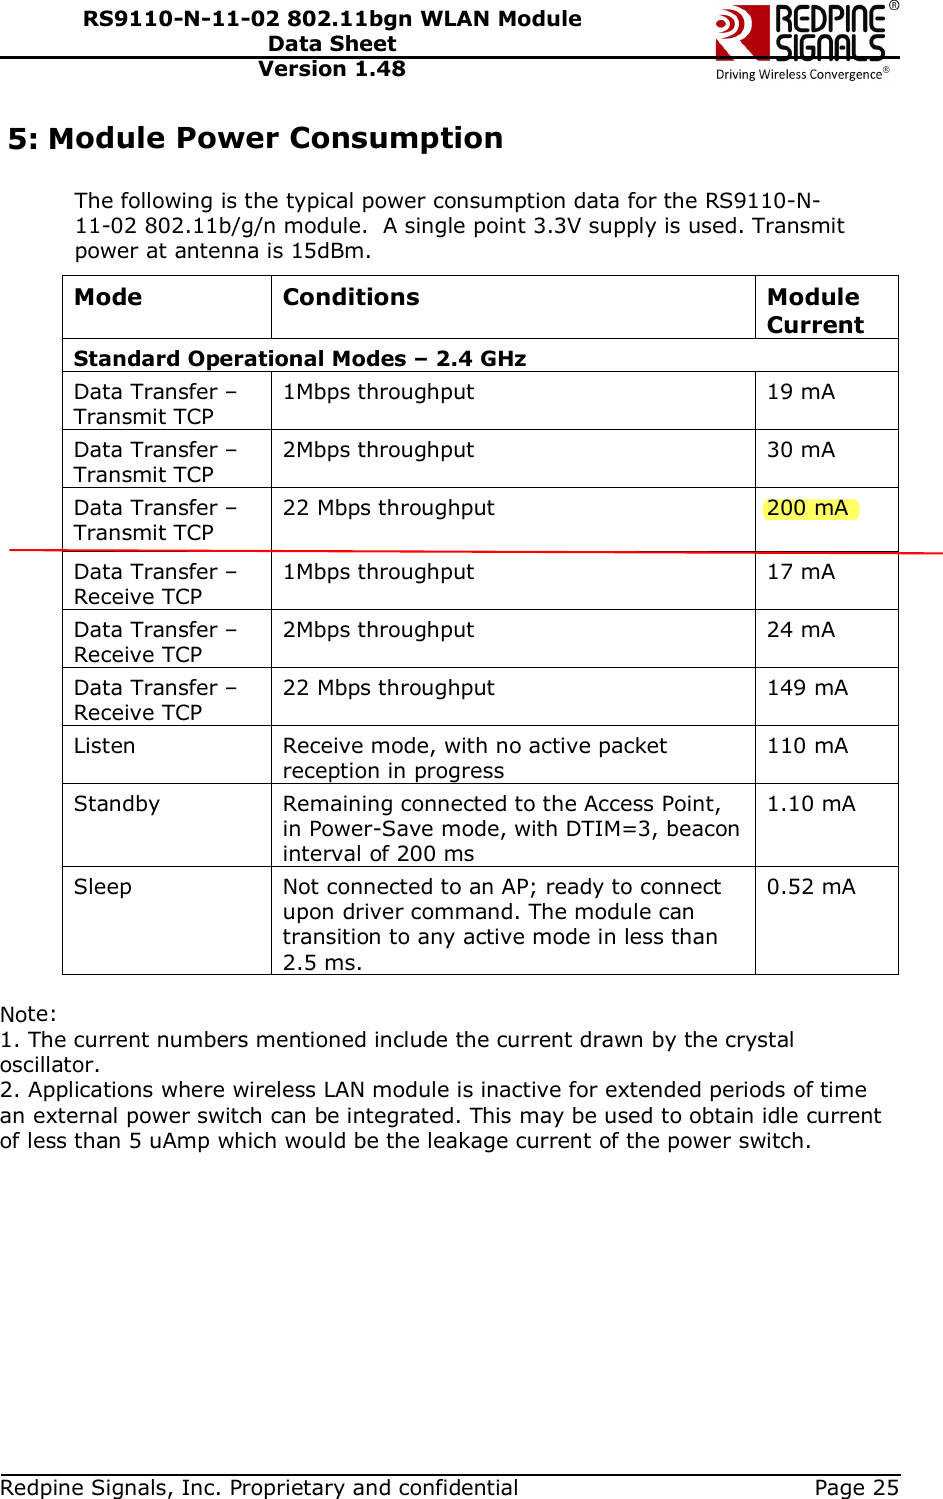   Redpine Signals, Inc. Proprietary and confidential  Page 25 RS9110-N-11-02 802.11bgn WLAN Module Data Sheet Version 1.48 5: Module Power Consumption  The following is the typical power consumption data for the RS9110-N-11-02 802.11b/g/n module.  A single point 3.3V supply is used. Transmit power at antenna is 15dBm.  Mode  Conditions  Module Current Standard Operational Modes – 2.4 GHz Data Transfer – Transmit TCP 1Mbps throughput  19 mA Data Transfer – Transmit TCP 2Mbps throughput  30 mA Data Transfer – Transmit TCP 22 Mbps throughput  200 mA  Data Transfer – Receive TCP 1Mbps throughput  17 mA Data Transfer – Receive TCP 2Mbps throughput  24 mA Data Transfer – Receive TCP 22 Mbps throughput  149 mA Listen  Receive mode, with no active packet reception in progress 110 mA Standby  Remaining connected to the Access Point, in Power-Save mode, with DTIM=3, beacon interval of 200 ms 1.10 mA Sleep  Not connected to an AP; ready to connect upon driver command. The module can transition to any active mode in less than 2.5 ms. 0.52 mA  Note:  1. The current numbers mentioned include the current drawn by the crystal oscillator. 2. Applications where wireless LAN module is inactive for extended periods of time an external power switch can be integrated. This may be used to obtain idle current of less than 5 uAmp which would be the leakage current of the power switch.  